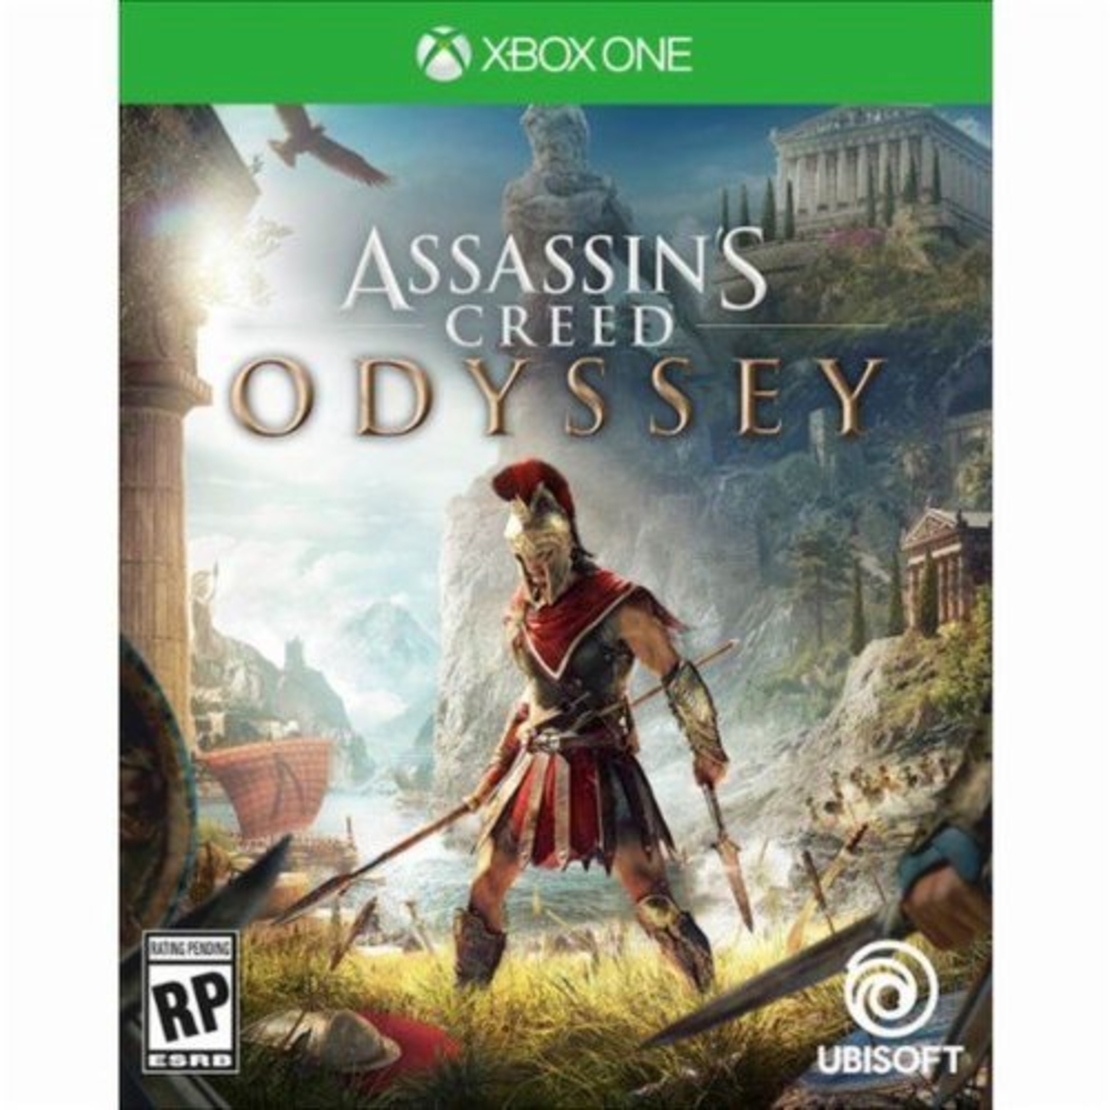 xBox One Assassin's Creed Odyssey